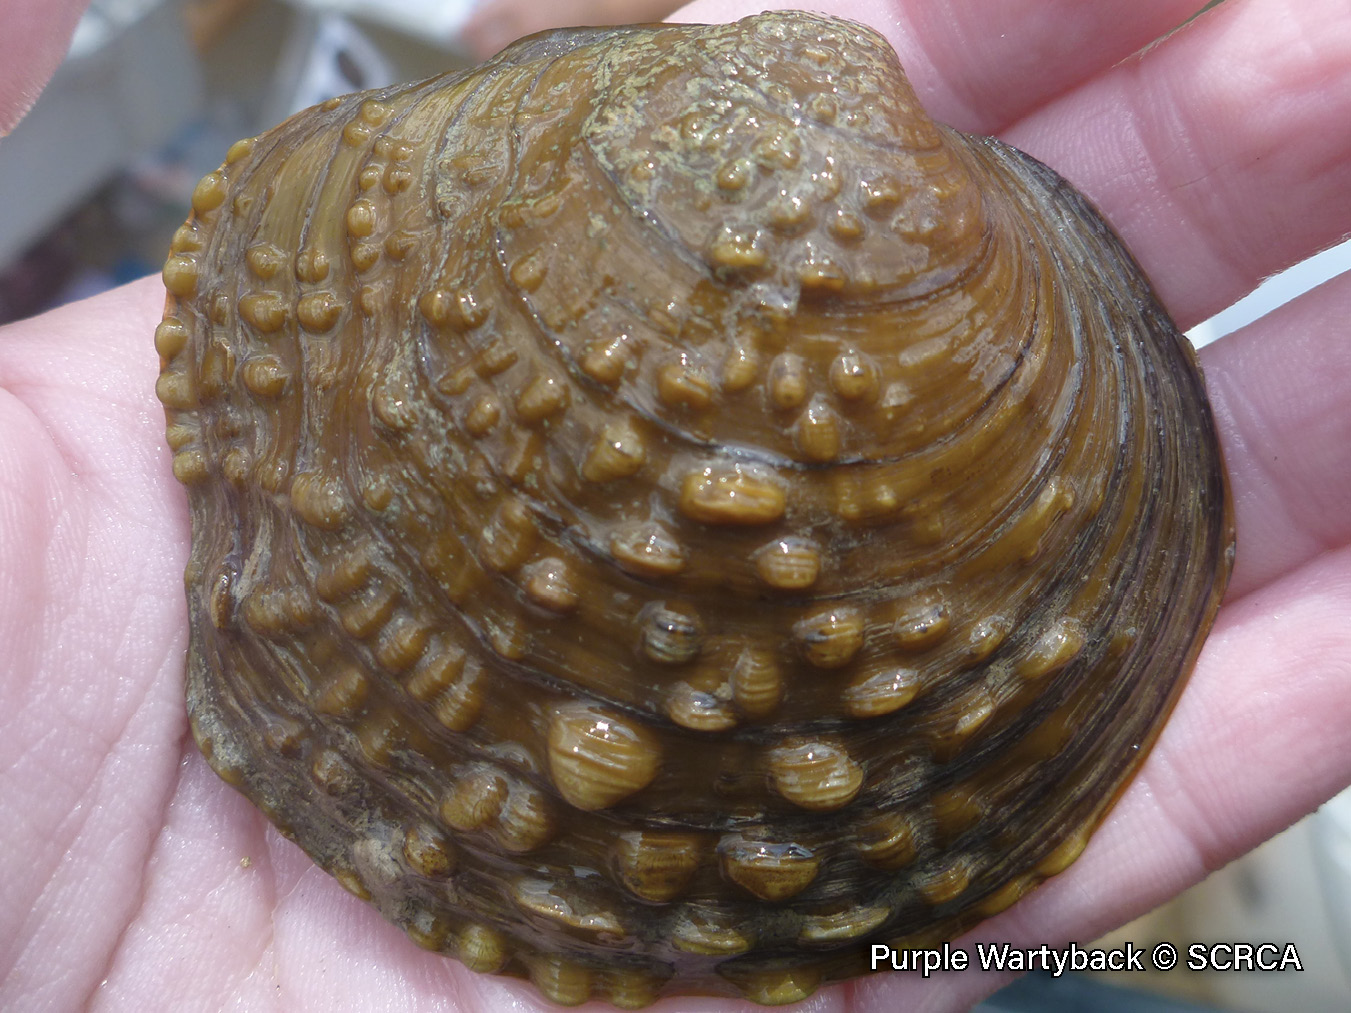 Picture of a Purple Wartyback mussel in a hand, a yellowish-brown, medium-sized mussel that is covered in bumps